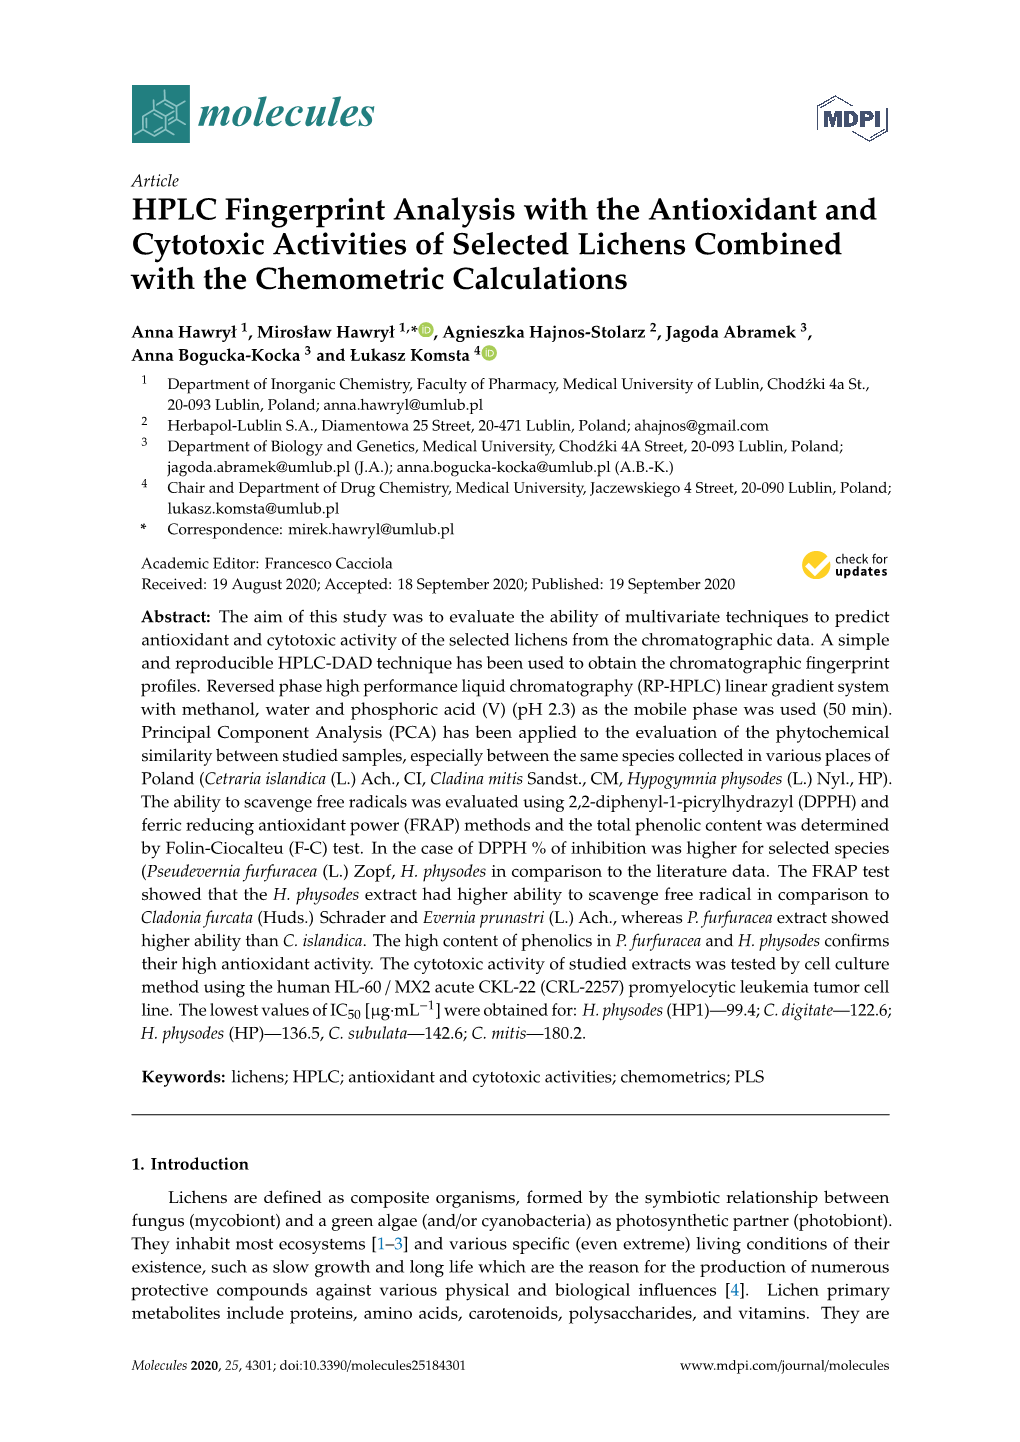 HPLC Fingerprint Analysis with the Antioxidant and Cytotoxic Activities of Selected Lichens Combined with the Chemometric Calculations